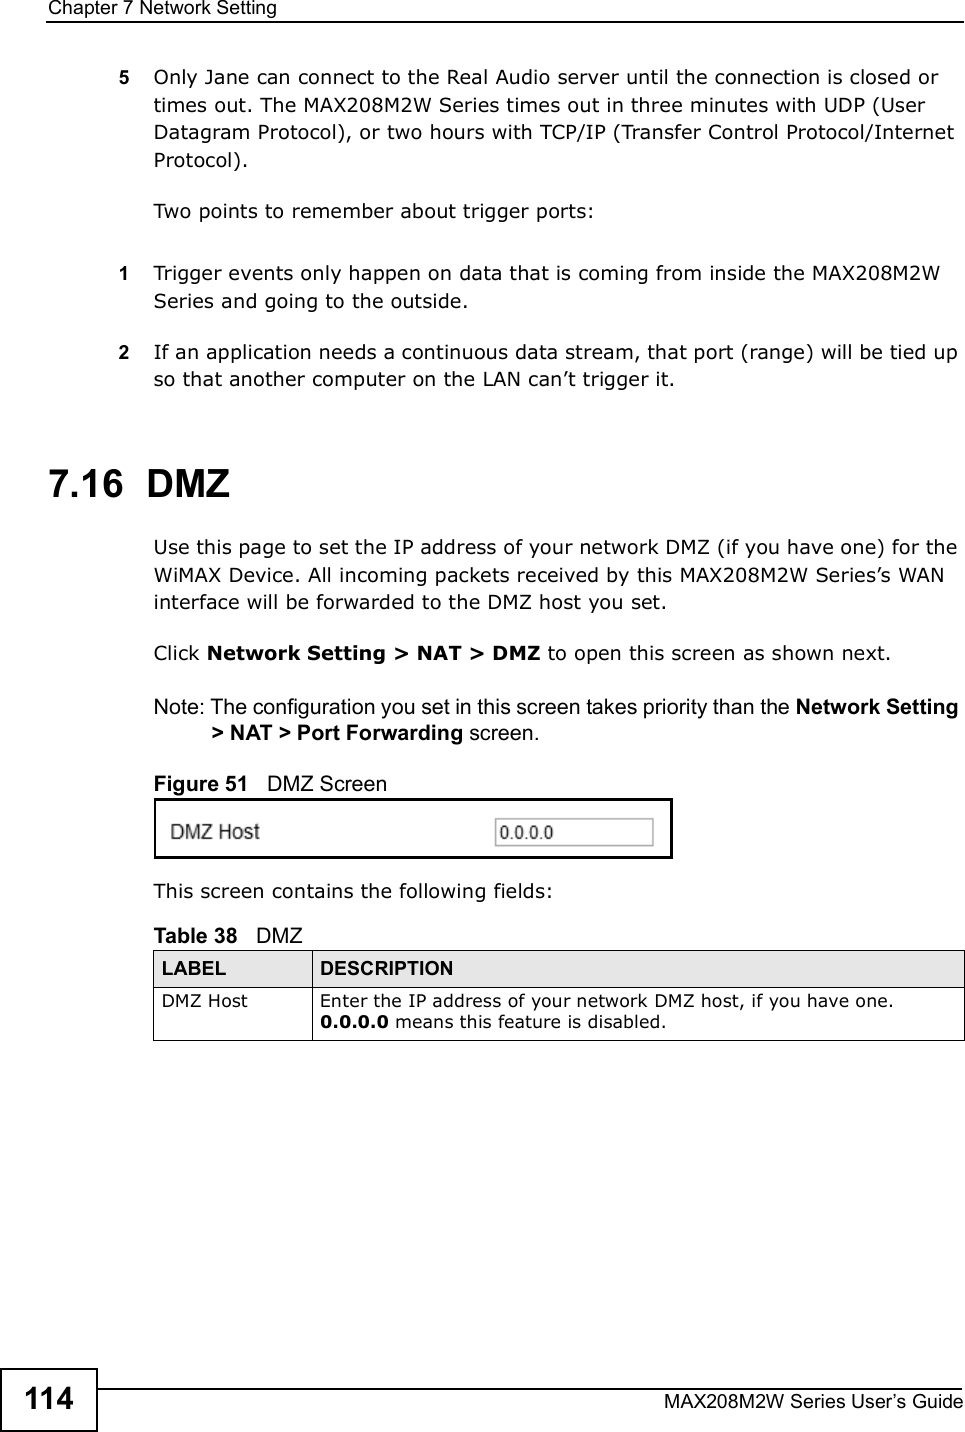 Chapter 7Network SettingMAX208M2W Series User s Guide1145Only Jane can connect to the Real Audio server until the connection is closed or times out. The MAX208M2W Series times out in three minutes with UDP (User Datagram Protocol), or two hours with TCP/IP (Transfer Control Protocol/Internet Protocol). Two points to remember about trigger ports:1Trigger events only happen on data that is coming from inside the MAX208M2W Series and going to the outside.2If an application needs a continuous data stream, that port (range) will be tied up so that another computer on the LAN can t trigger it. 7.16  DMZUse this page to set the IP address of your network DMZ (if you have one) for the WiMAX Device. All incoming packets received by this MAX208M2W Series s WAN interface will be forwarded to the DMZ host you set.Click Network Setting &gt; NAT &gt; DMZ to open this screen as shown next.Note: The configuration you set in this screen takes priority than the Network Setting &gt; NAT &gt; Port Forwarding screen.Figure 51   DMZ ScreenThis screen contains the following fields:Table 38   DMZLABEL DESCRIPTIONDMZ HostEnter the IP address of your network DMZ host, if you have one. 0.0.0.0 means this feature is disabled.